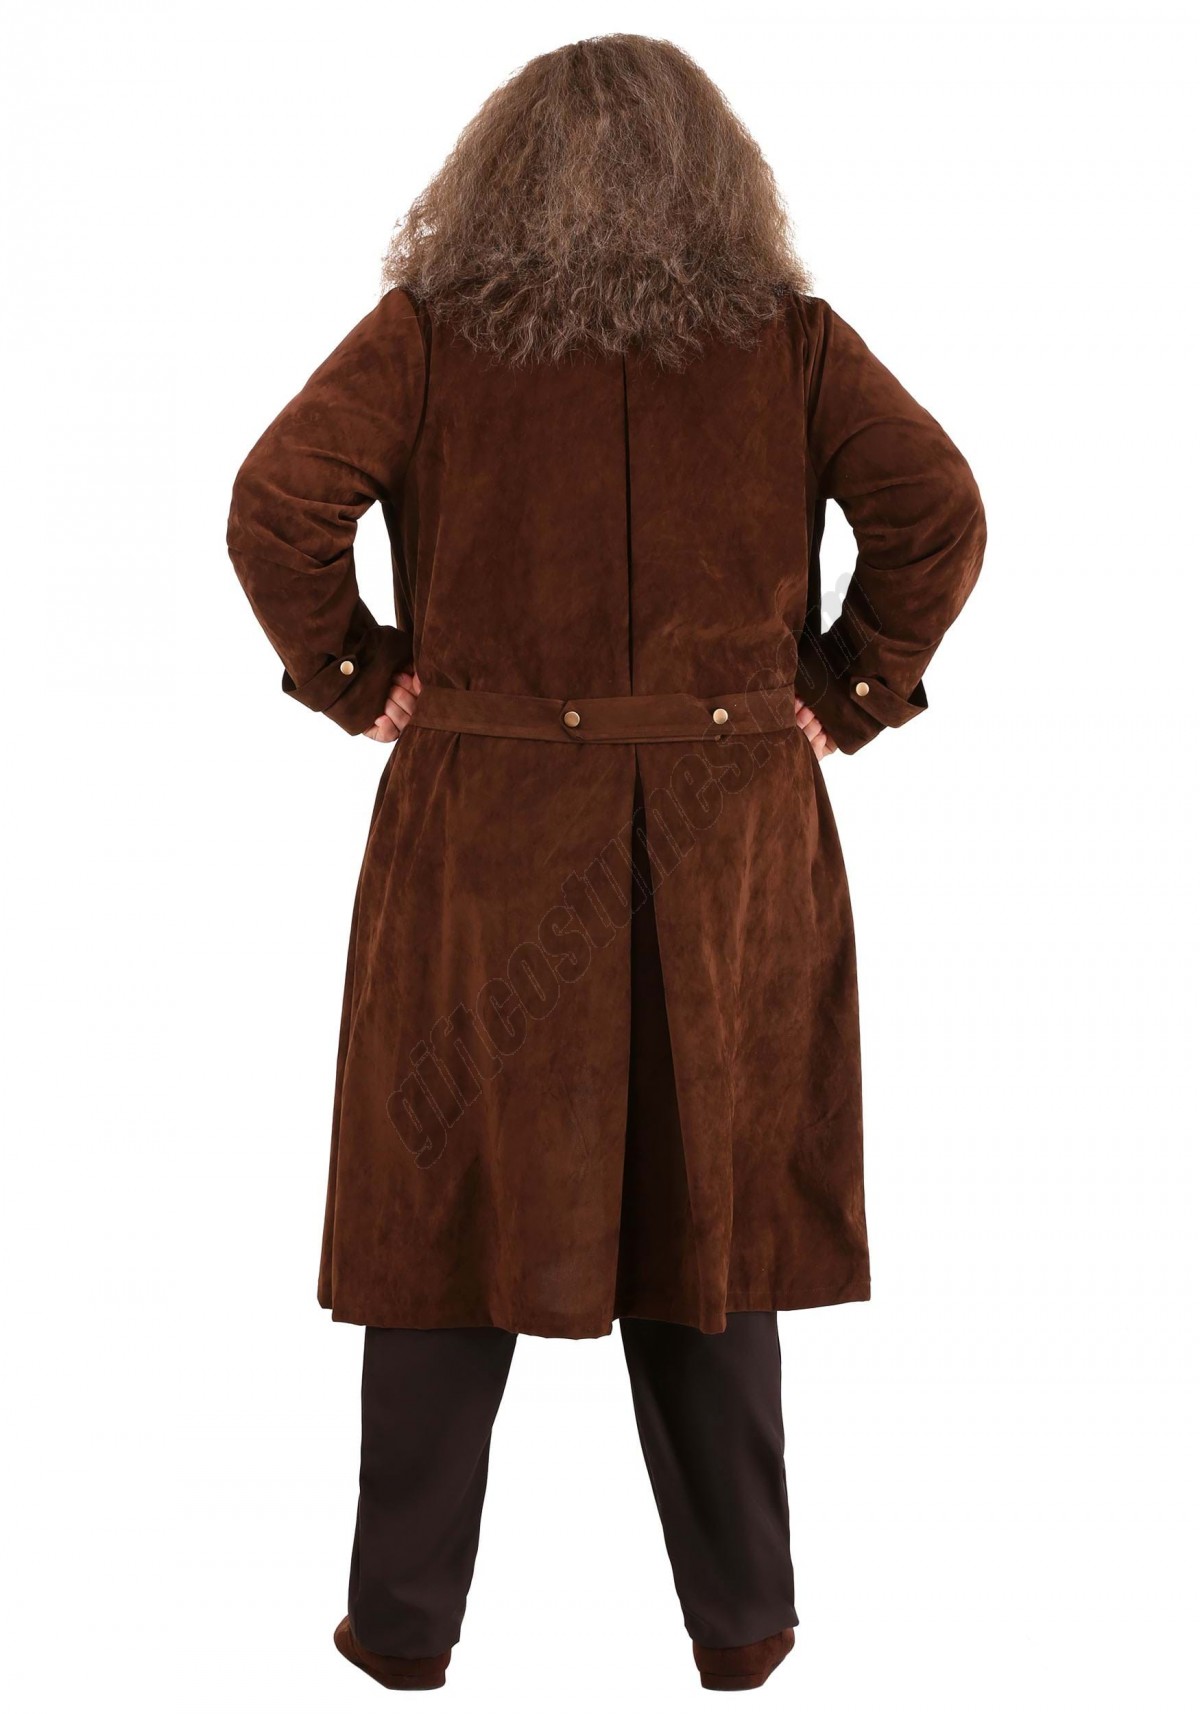 Deluxe Harry Potter Hagrid Plus Size Costume Promotions - -1